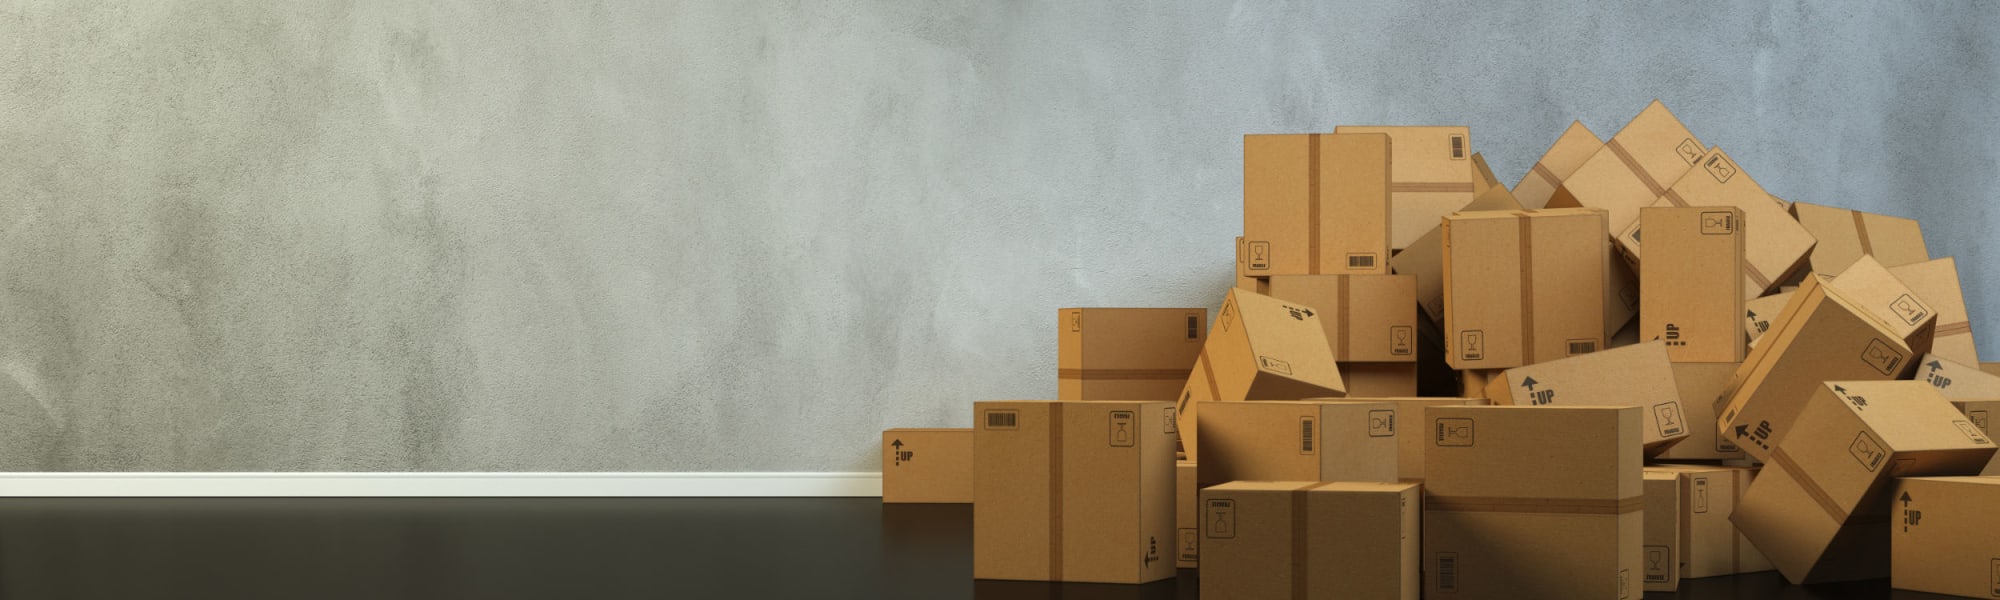 Find out what size storage unit will fit your belongings